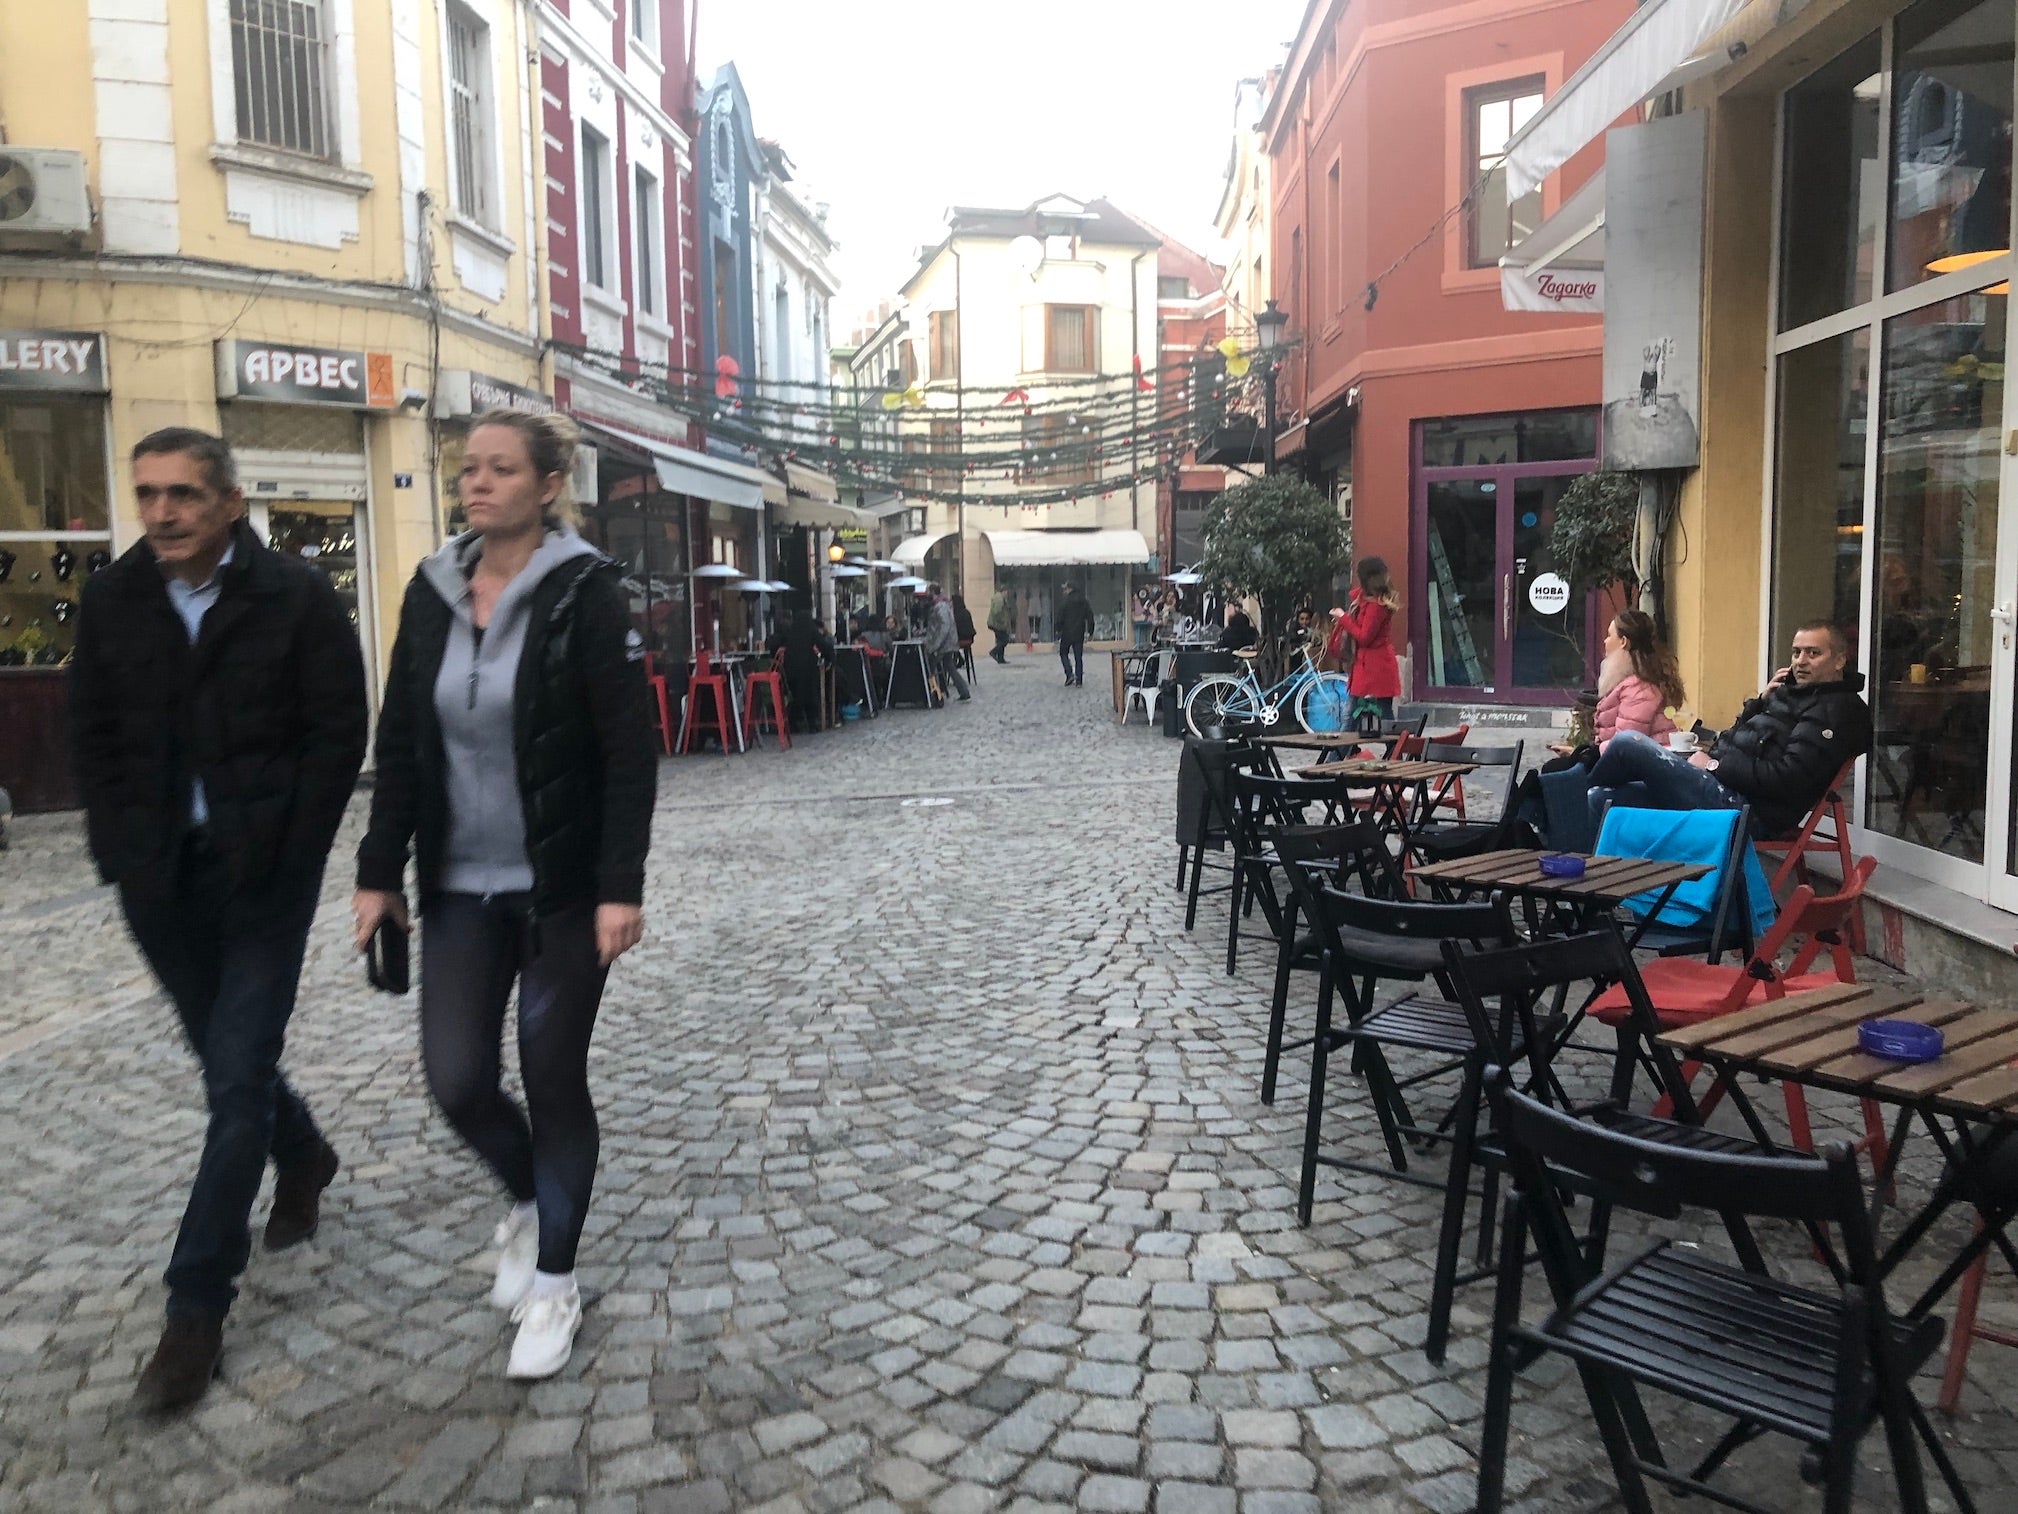 People walk through The Trap, a neighbourhood of shops and cafes